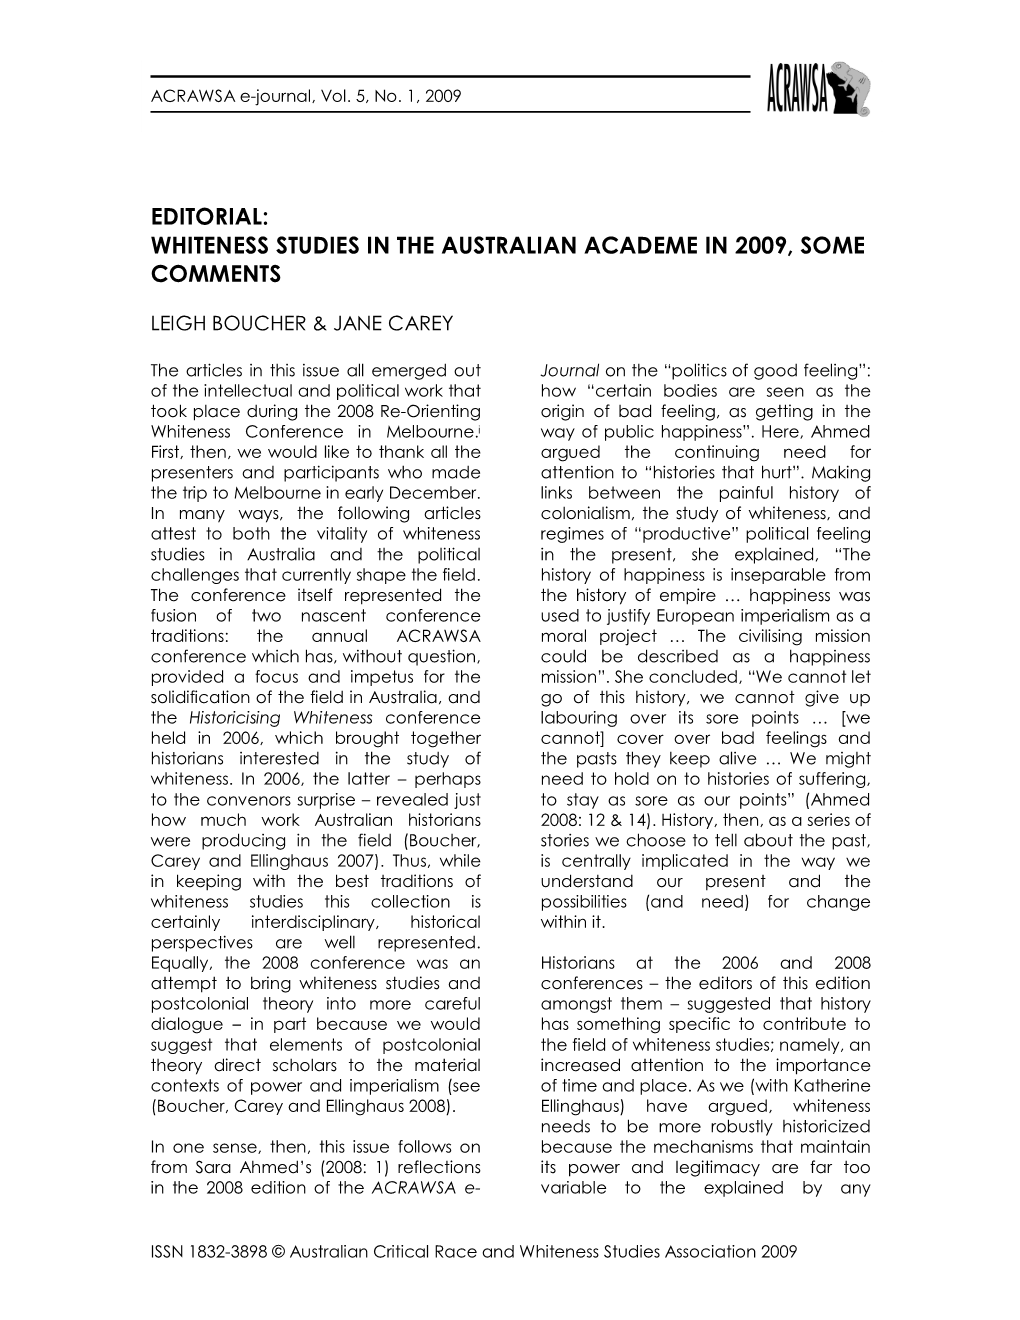 Whiteness Studies in the Australian Academe in 2009, Some Comments